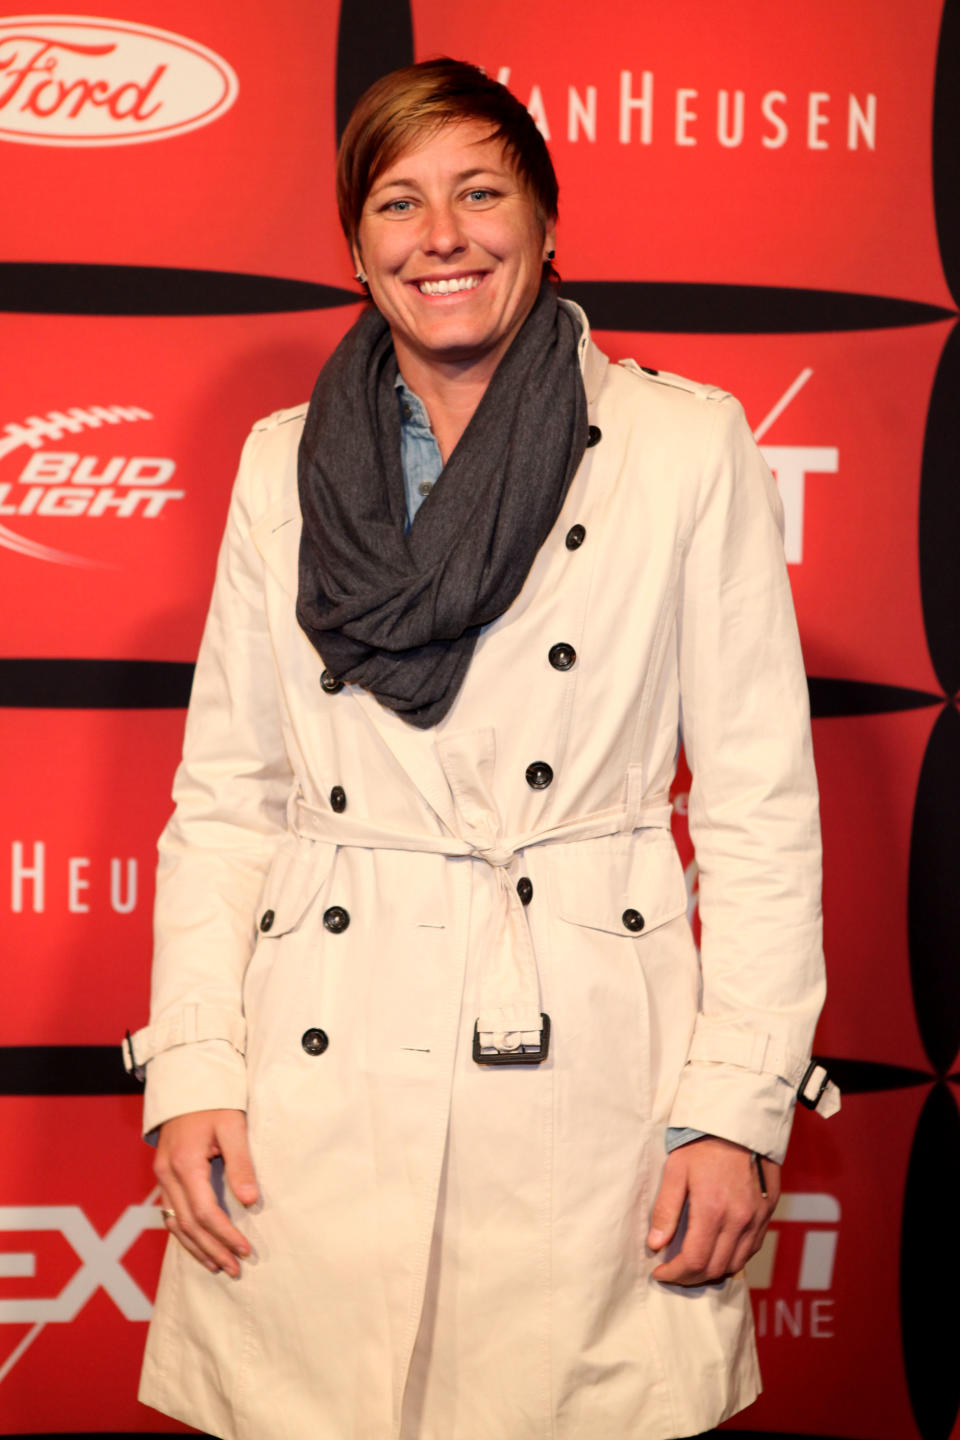 Soccer player Abby Wambach attends ESPN The Magazine's "NEXT" Event on February 3, 2012 in Indianapolis, Indiana. (Photo by Robin Marchant/Getty Images for ESPN)